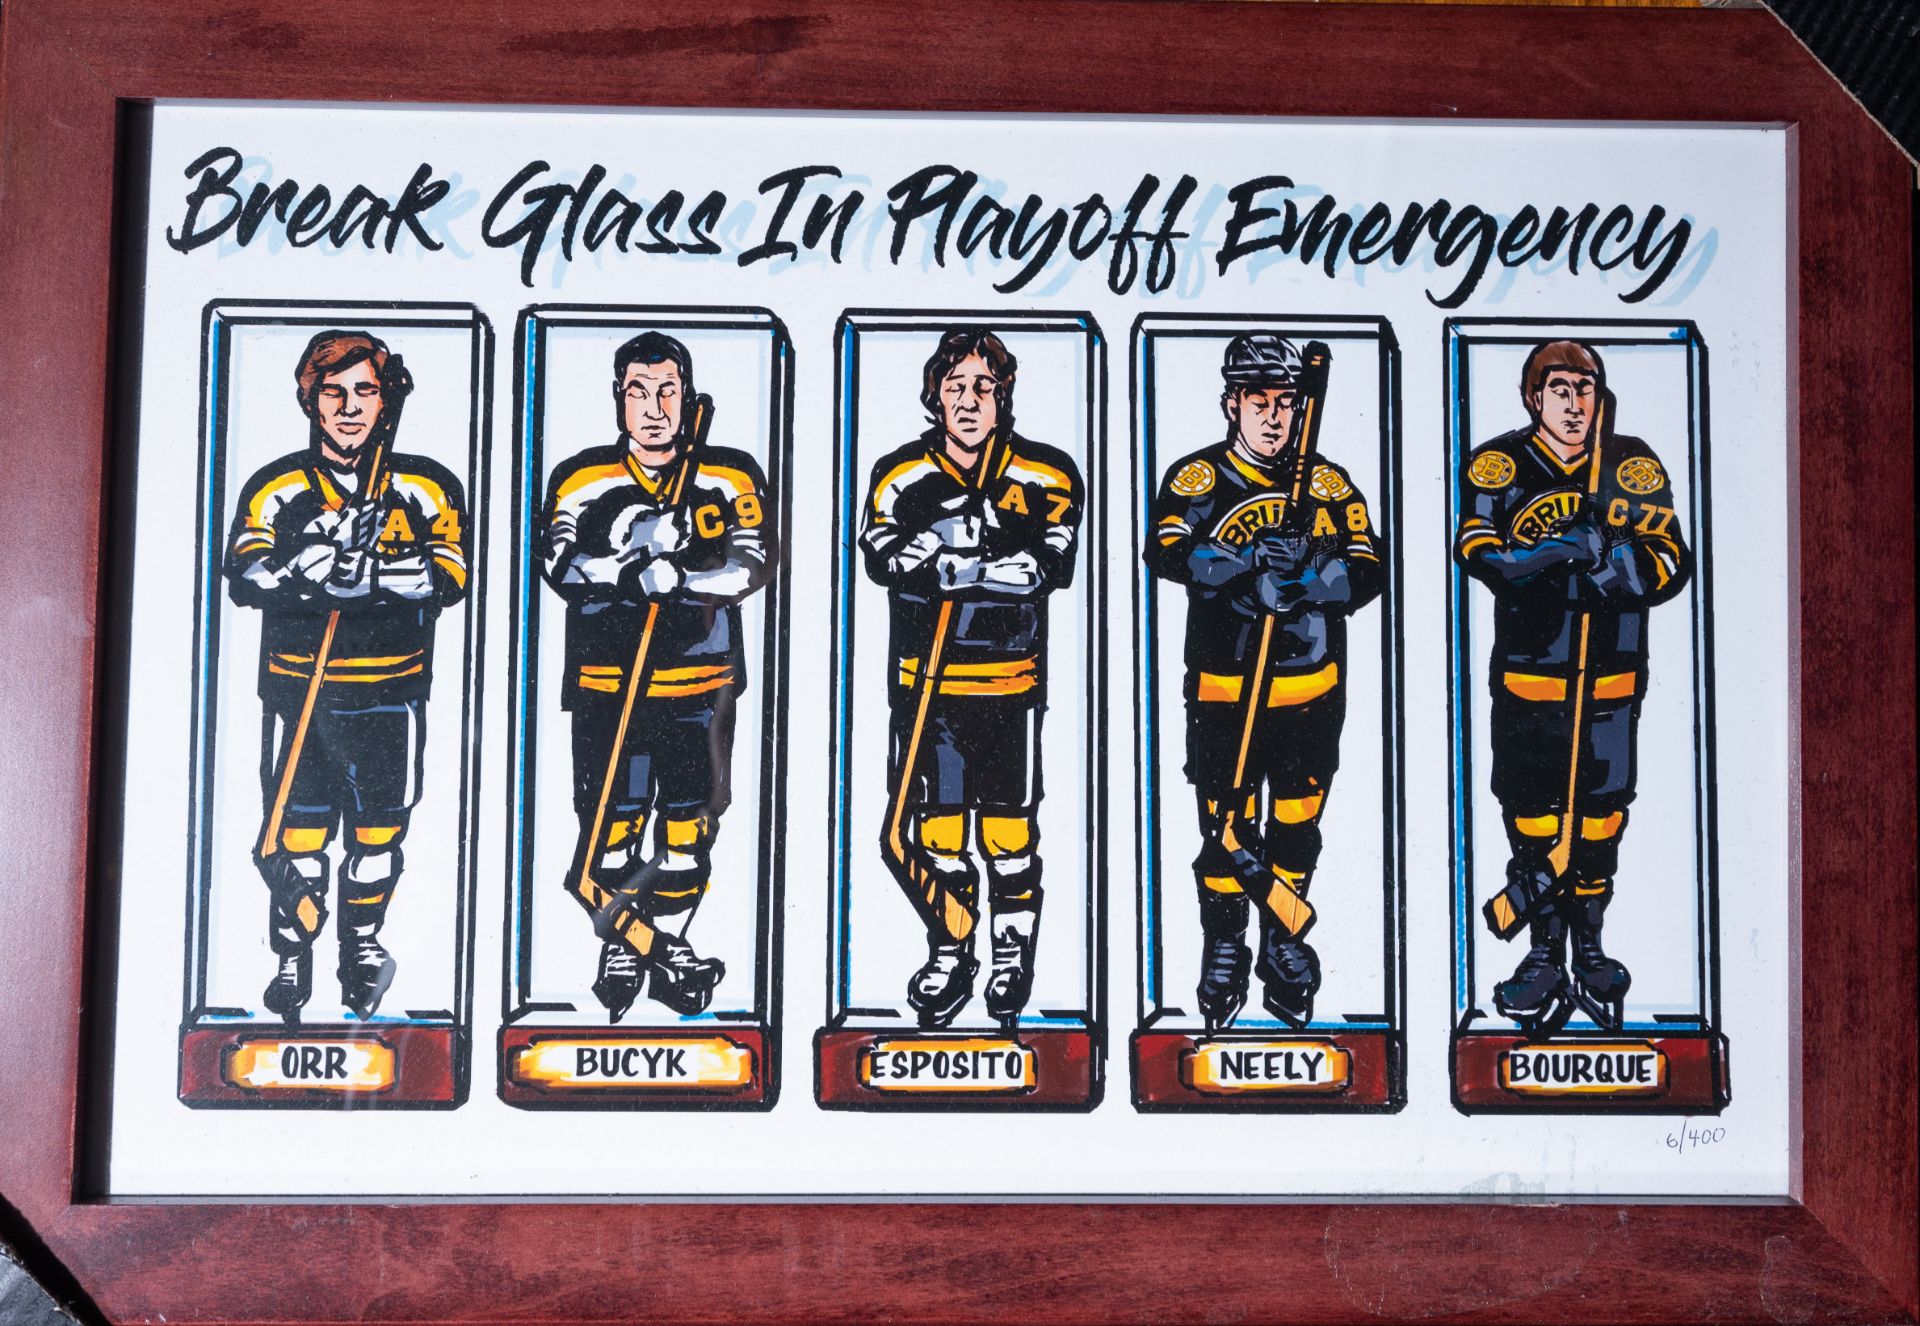 Bruins "Break Glass In Playoff Emergency" Caricature Framed and Numbered 6/400 19"x13"